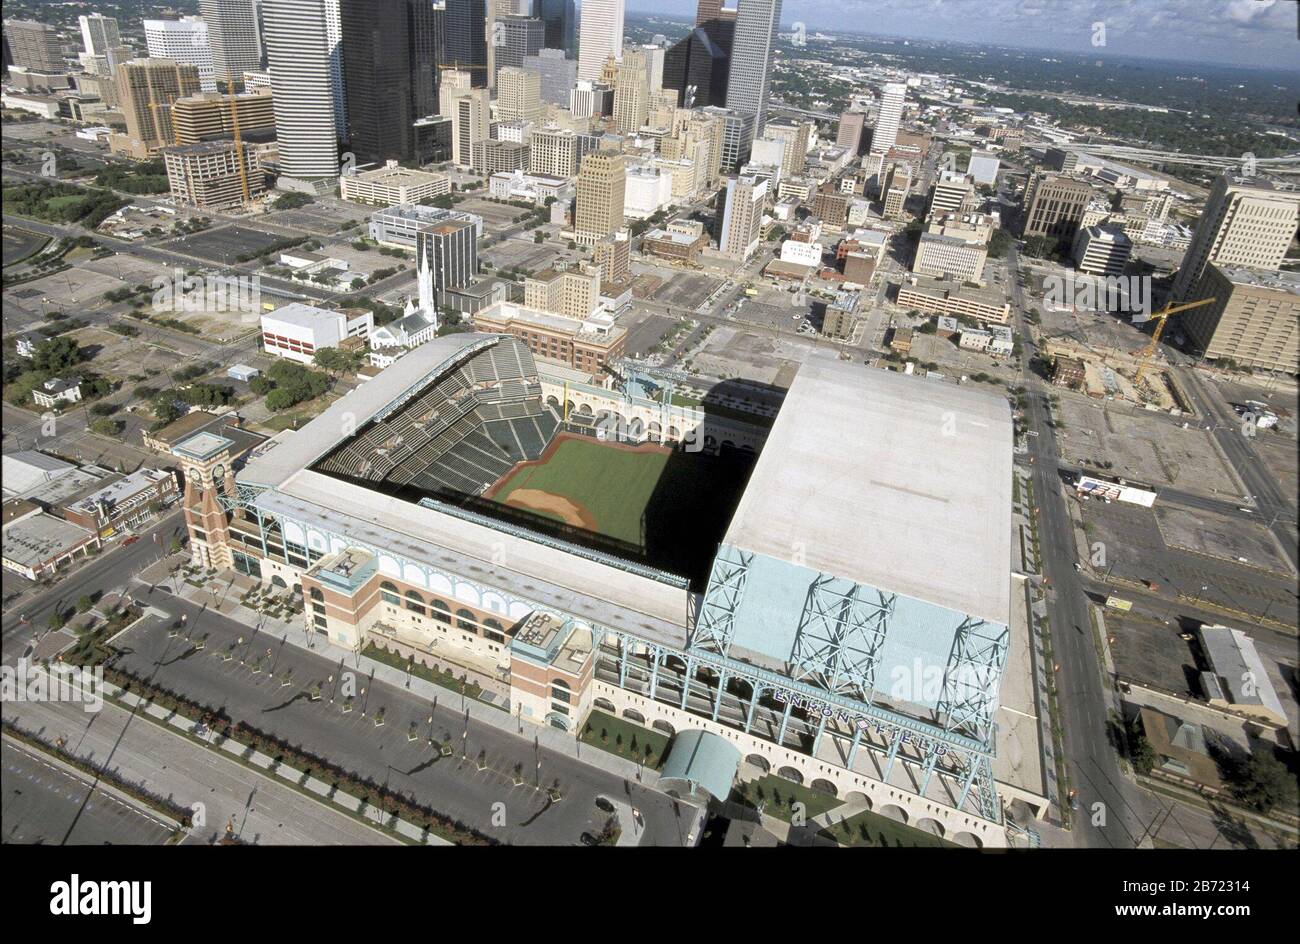 minute maid park retractable roof